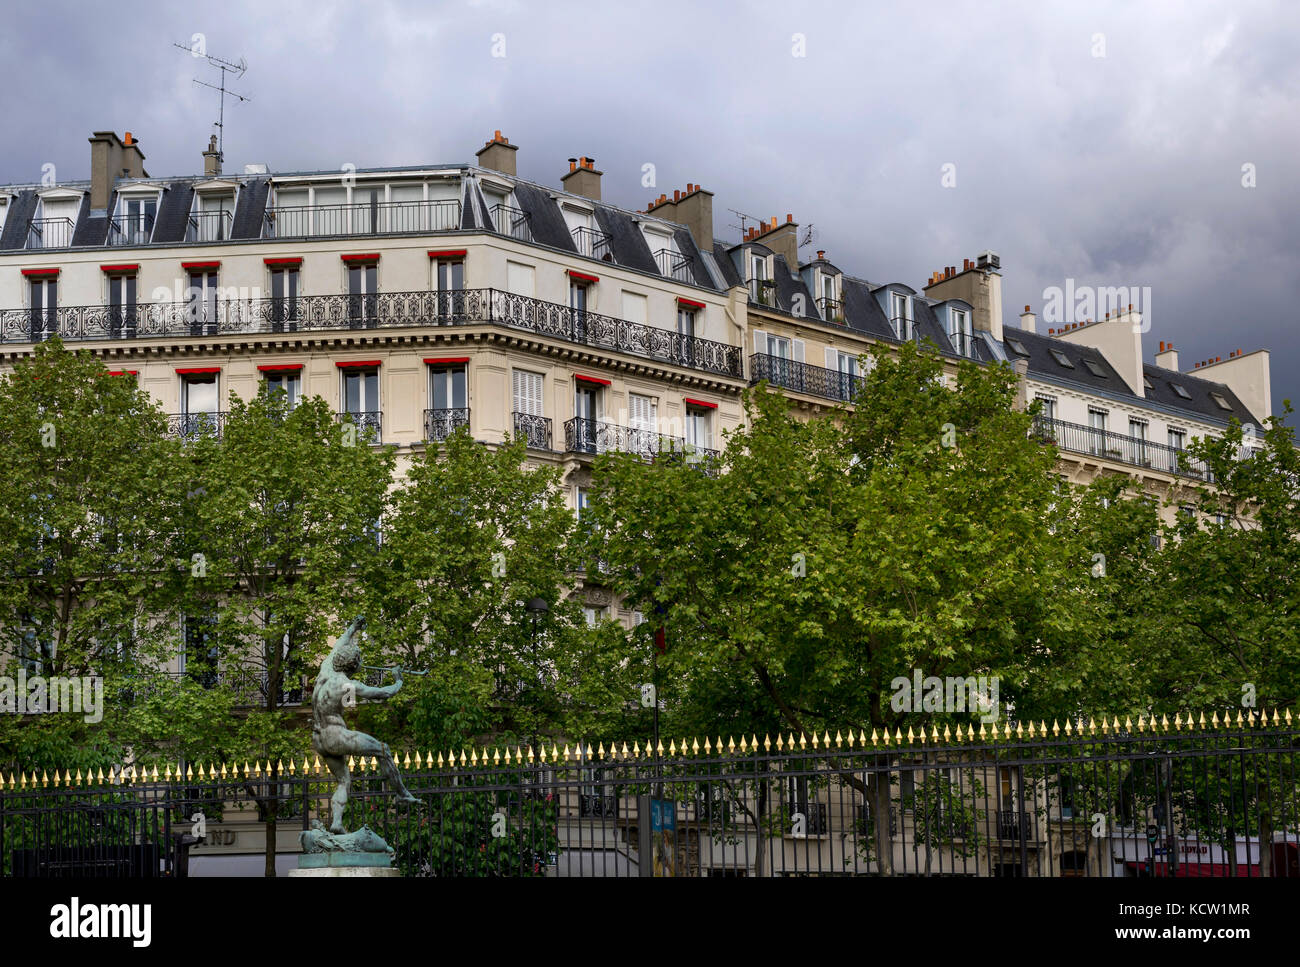 Luxembourg gardens fence and apartment buildings surrounding the park. Stock Photo